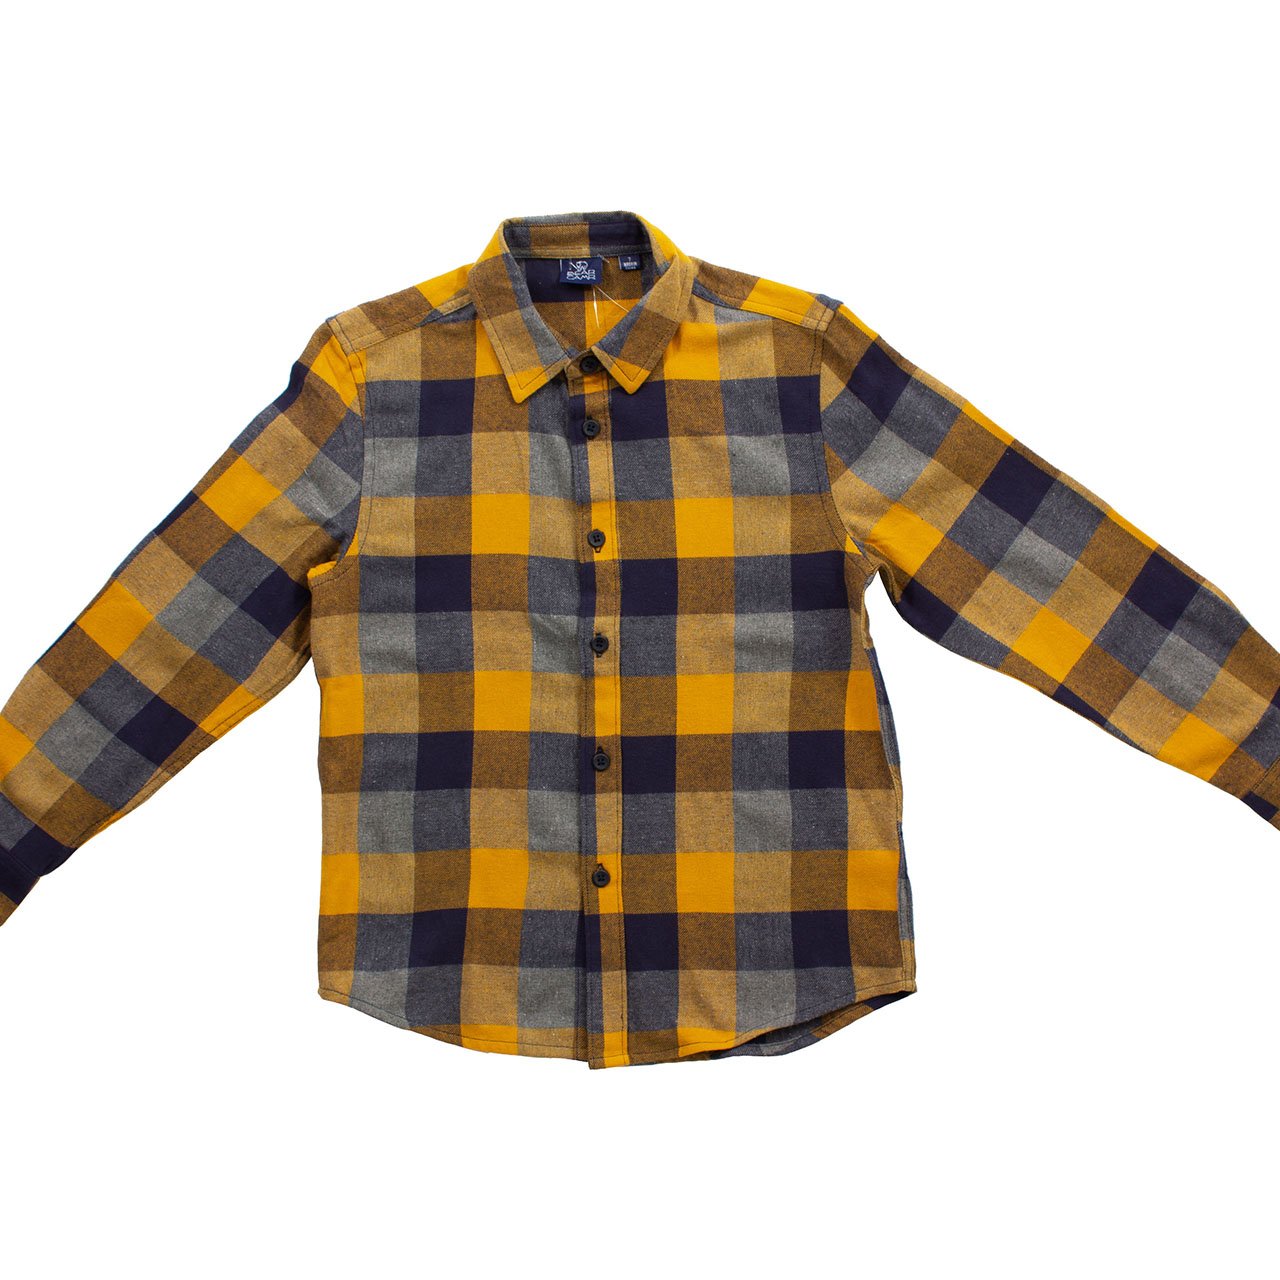 Picture of a Harvest Gold Flannel Button Up Shirt front